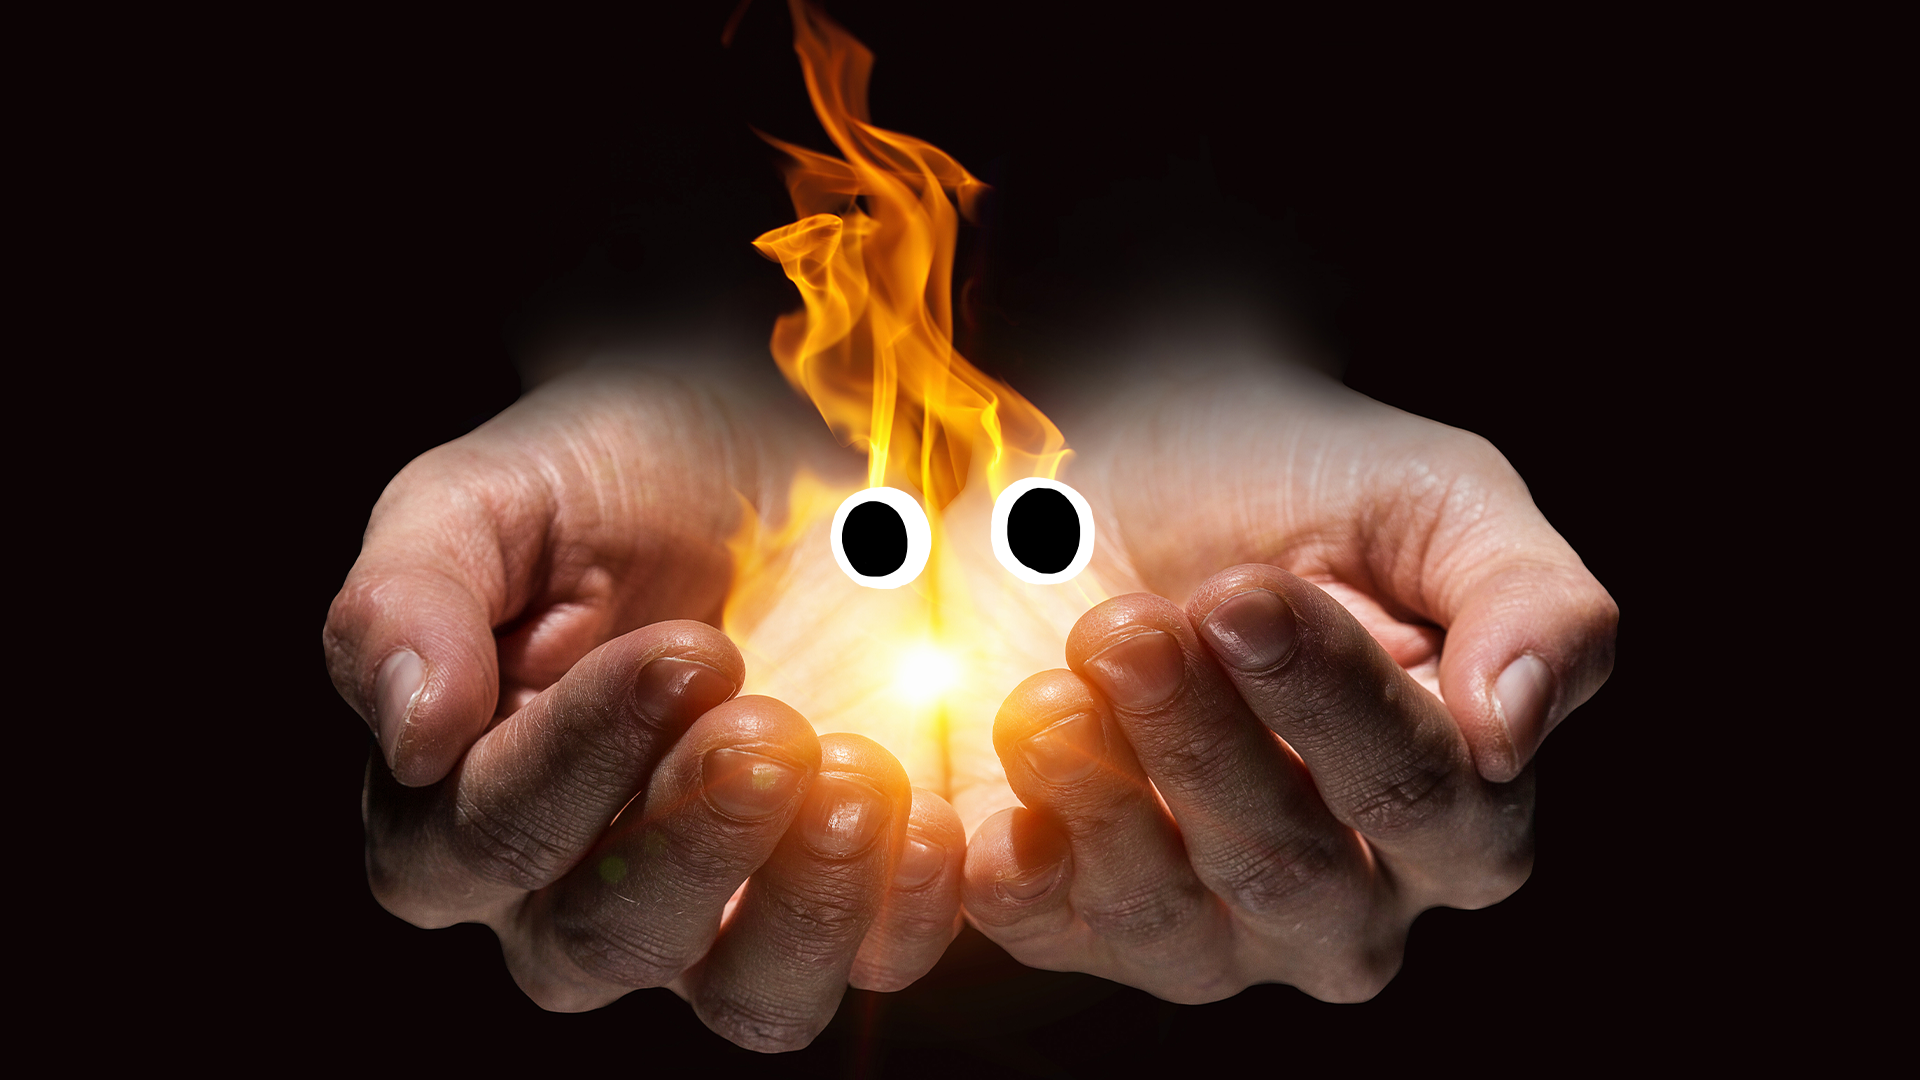 Hand full of fire magic with eyes